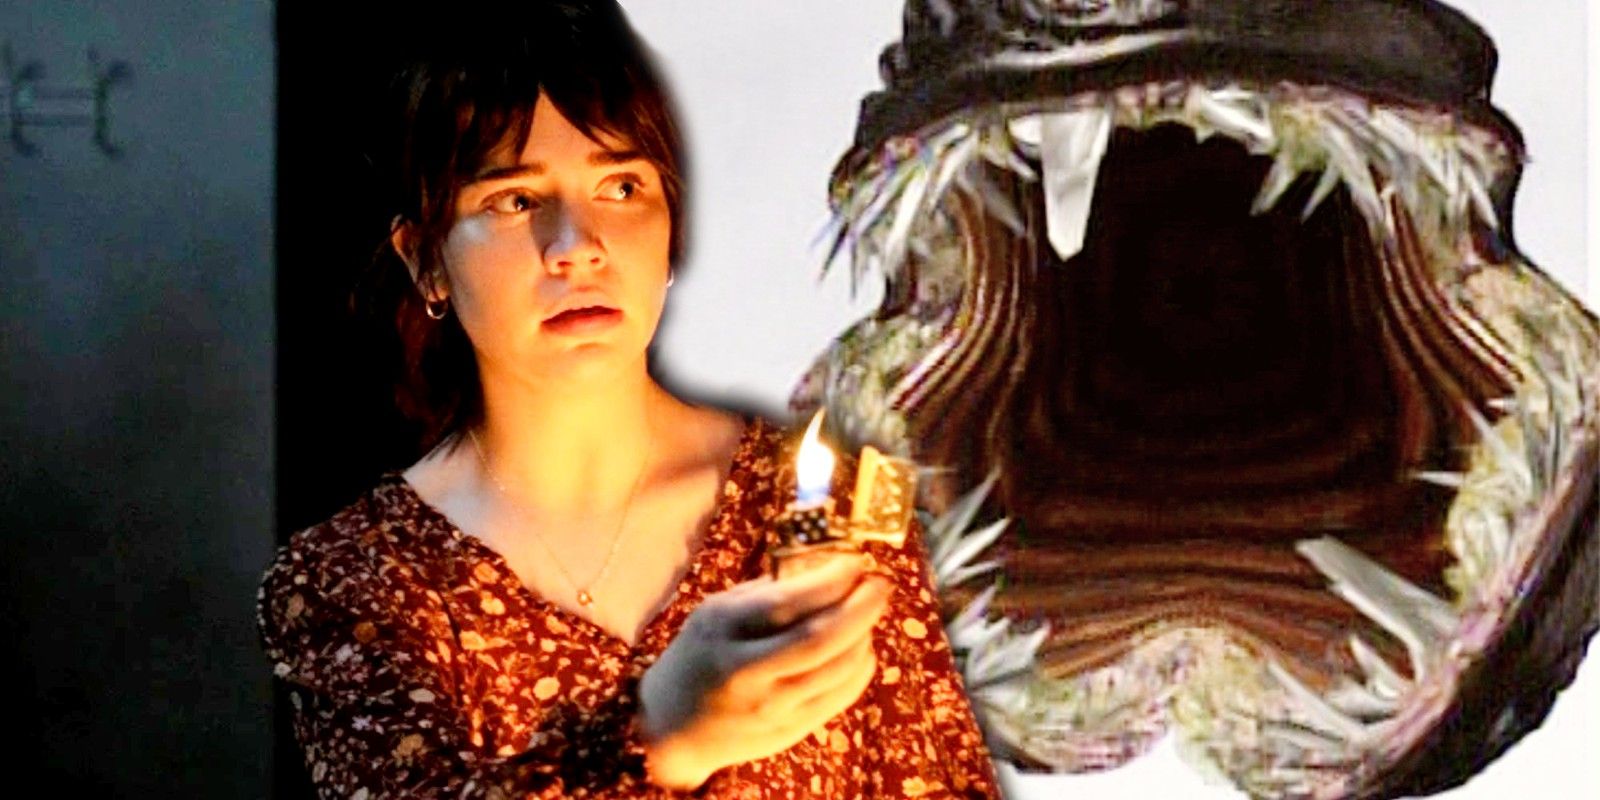 Blended image of a girl lighting up a match in The Boogeyman and the monster in The Langoliers